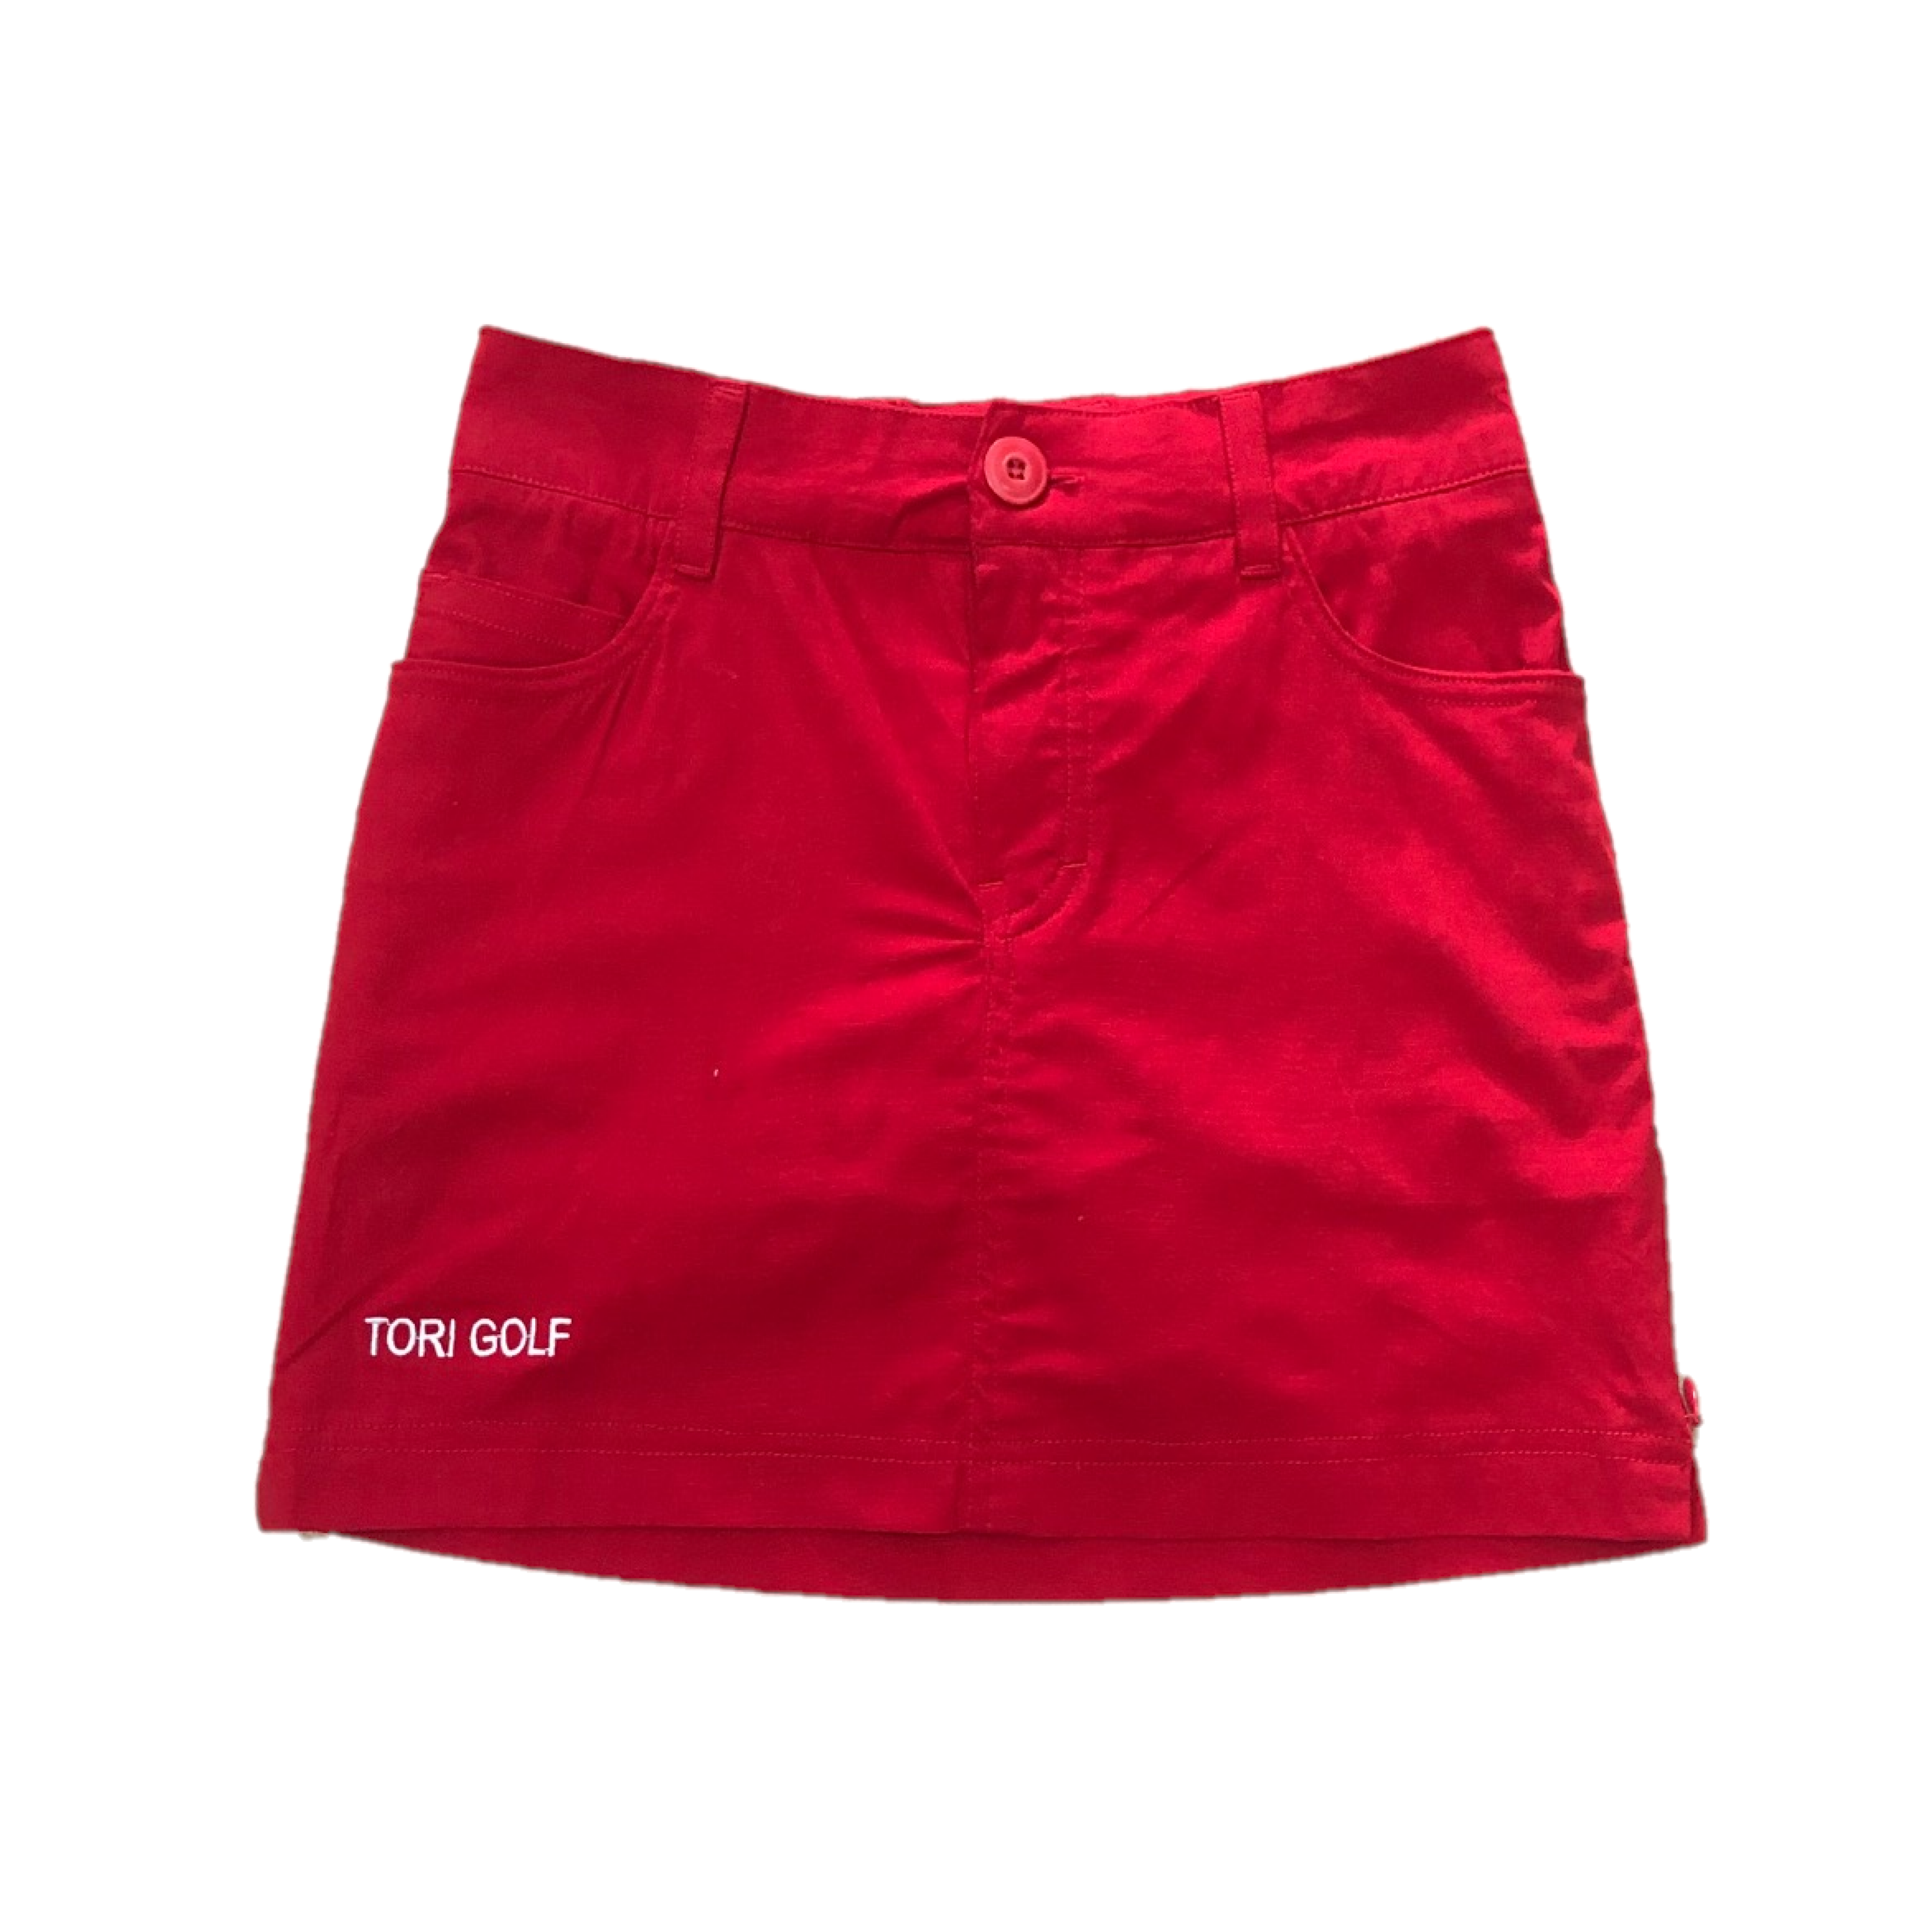 LS-021J || Ladies Skirt Red With 2 Round Front Pockets 2 Rear Patch Front Zipper And 2 Zipped Side Vents.